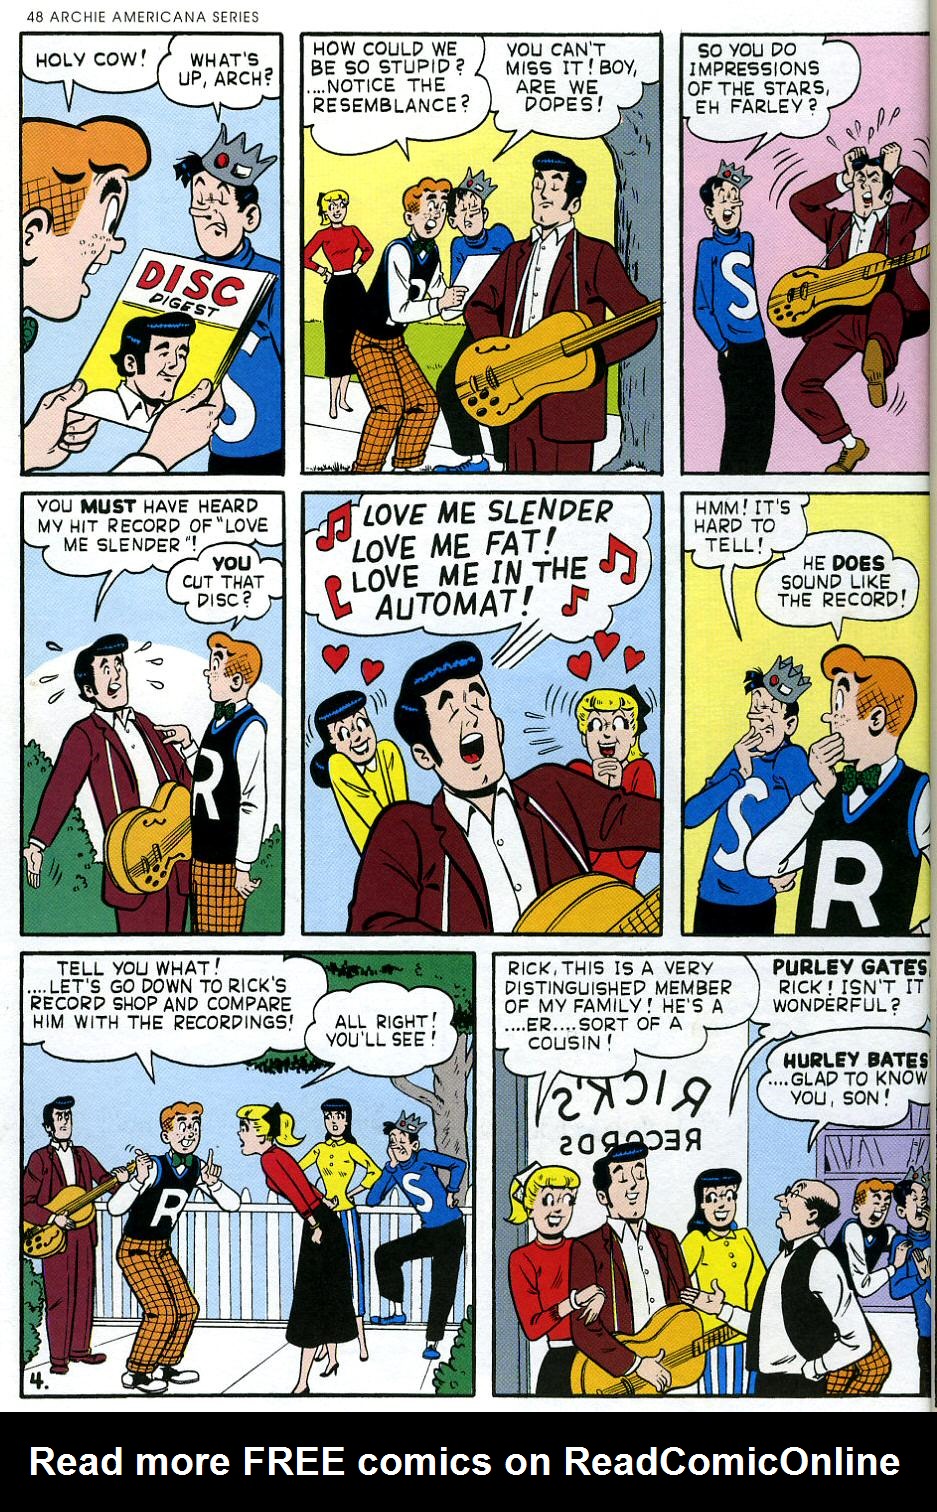 Read online Archie Americana Series comic -  Issue # TPB 2 - 50